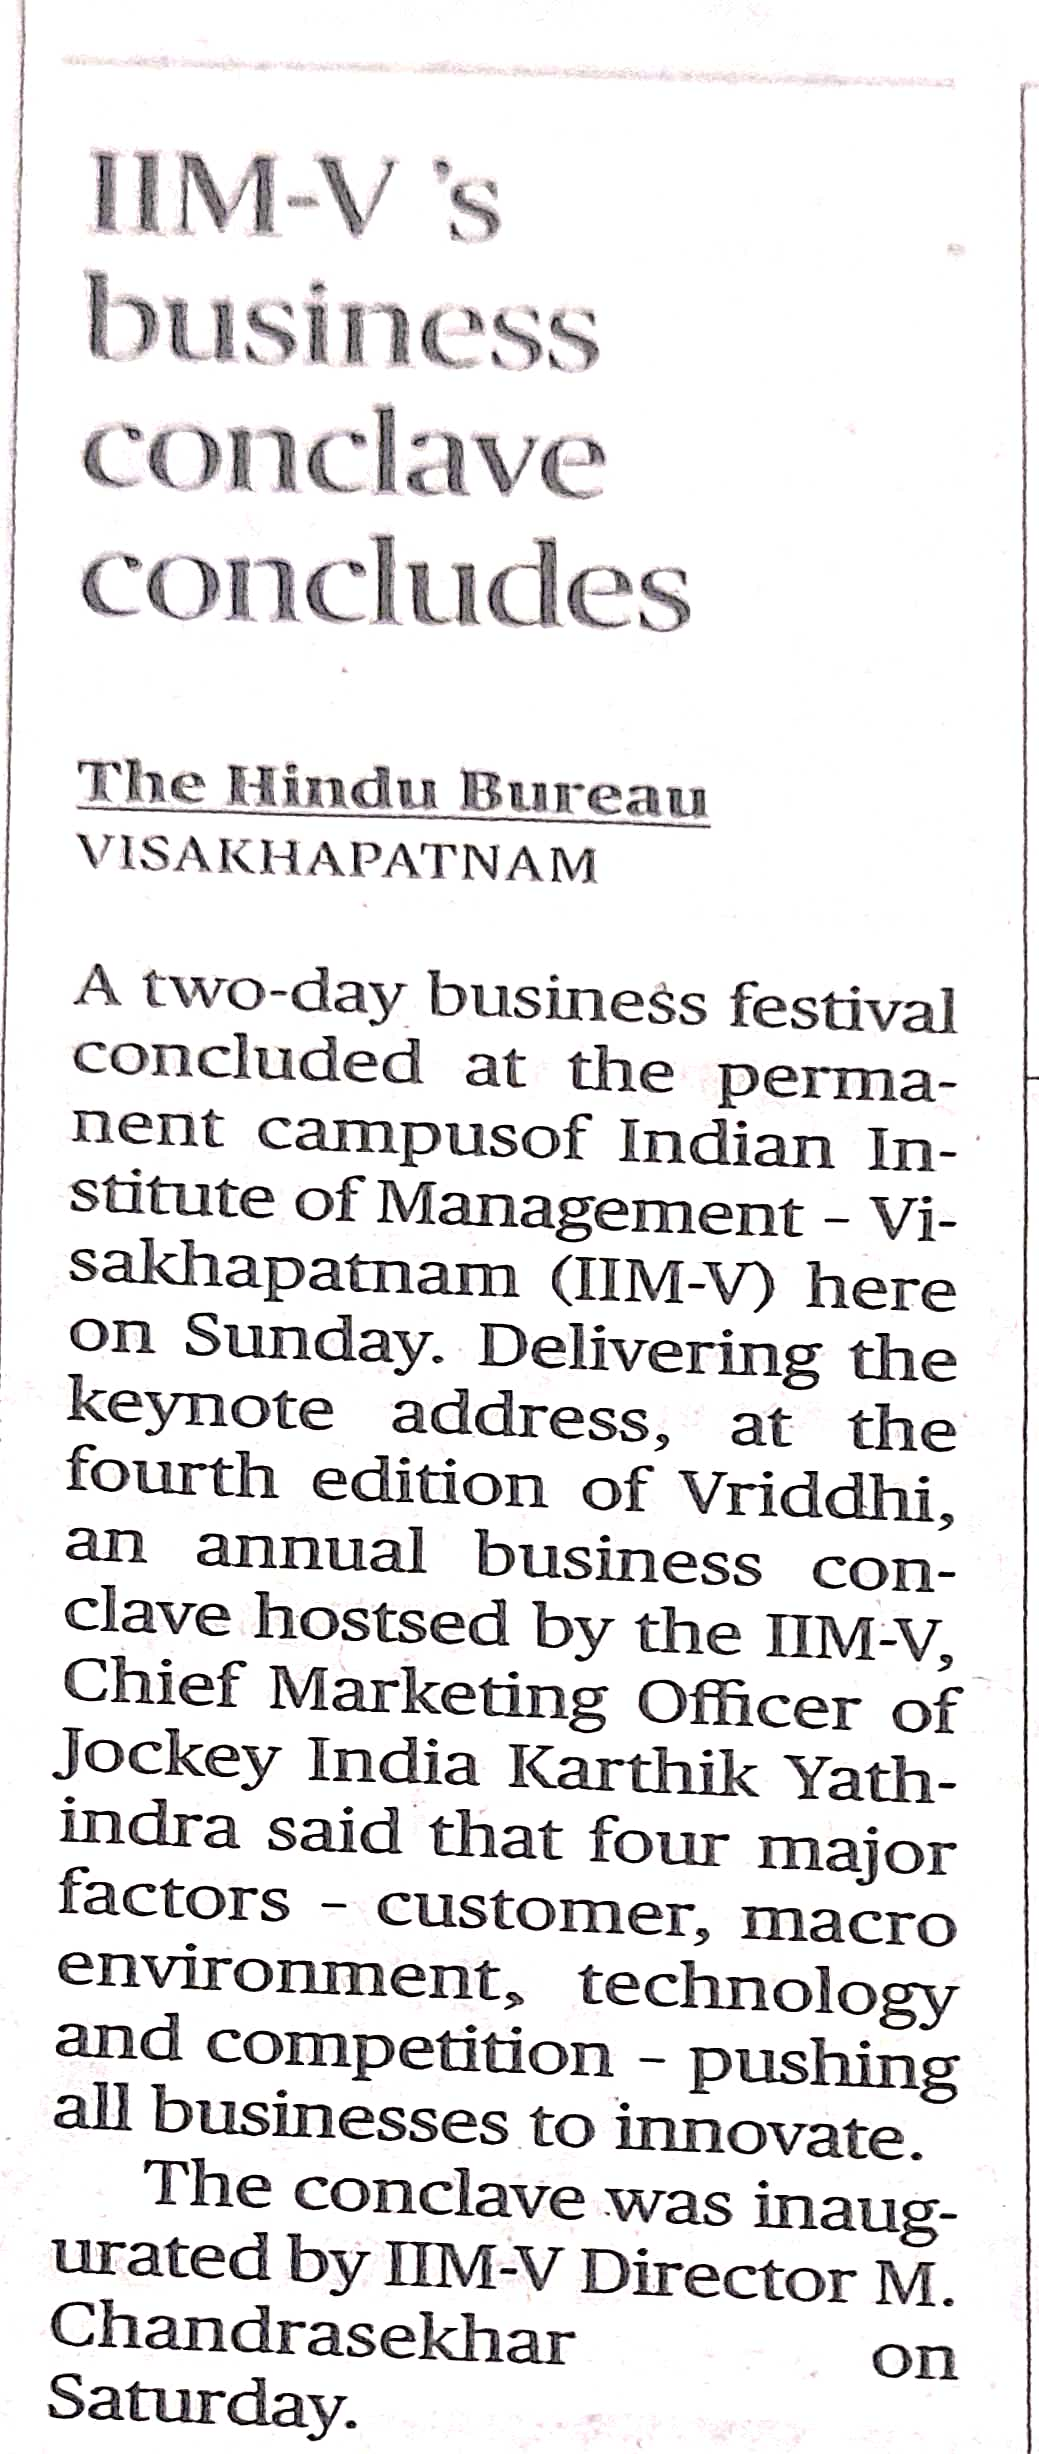 IIMV Business Conclave Concludes - 23.01.2023